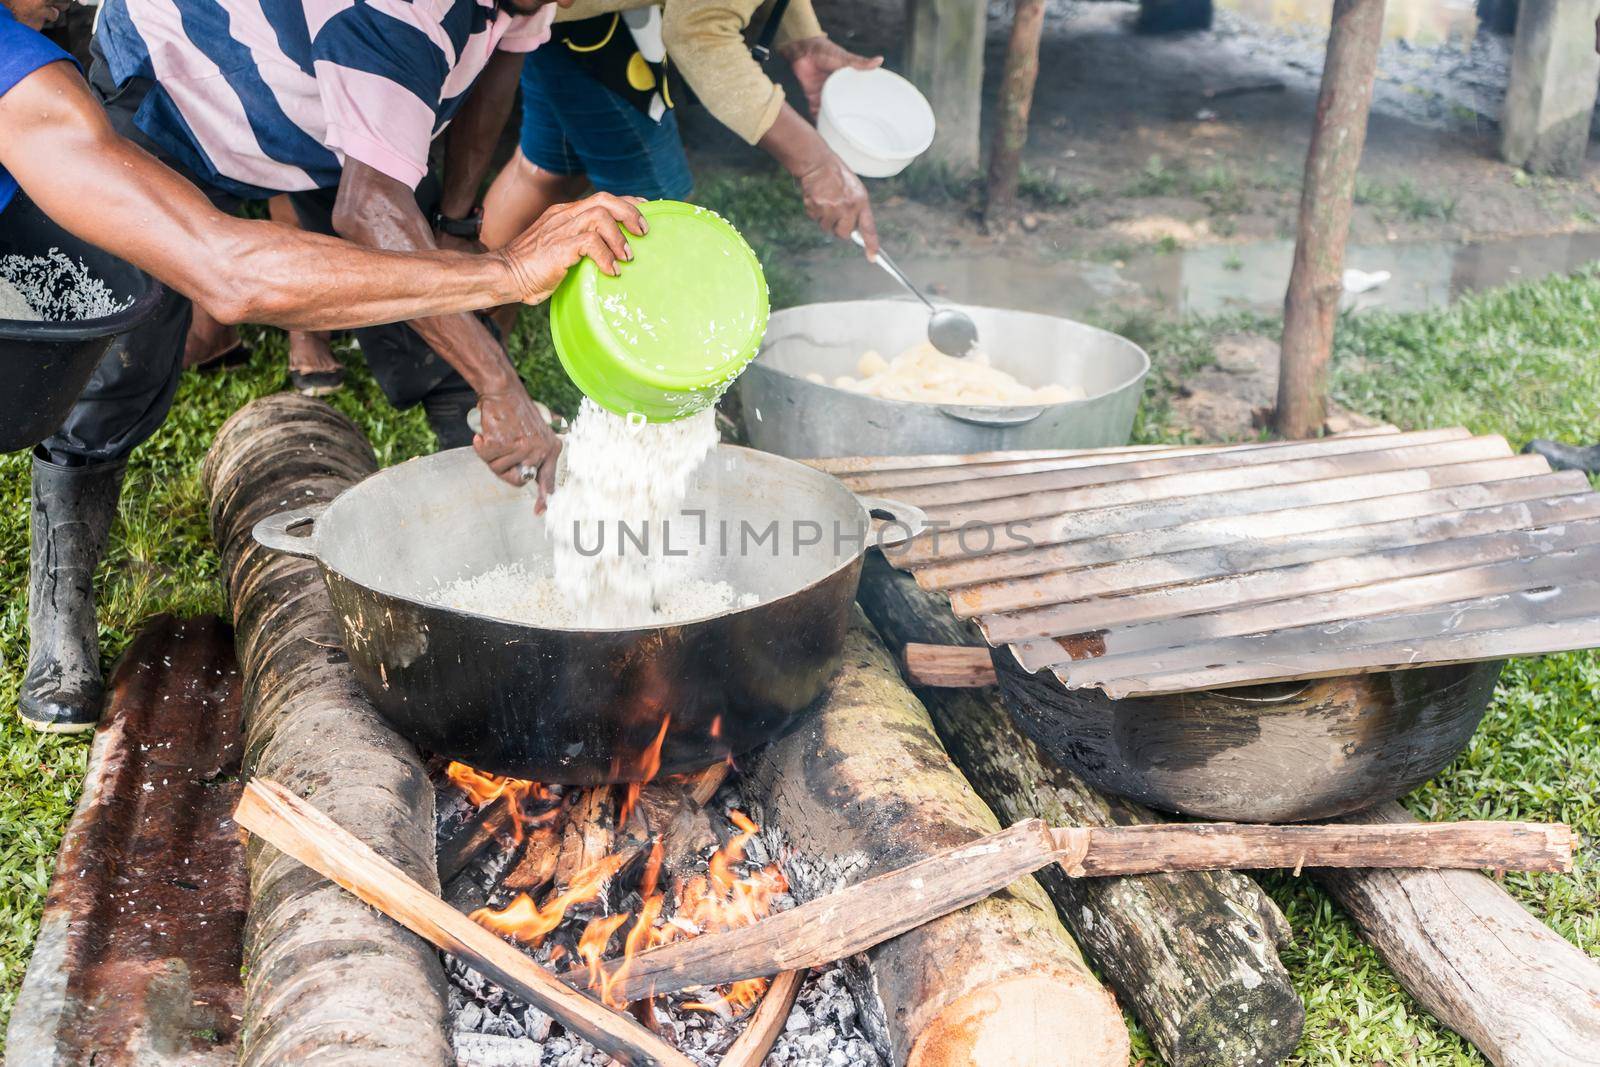 Indigenous people from Nicaragua cooking during the celebration of the international day of native peoples